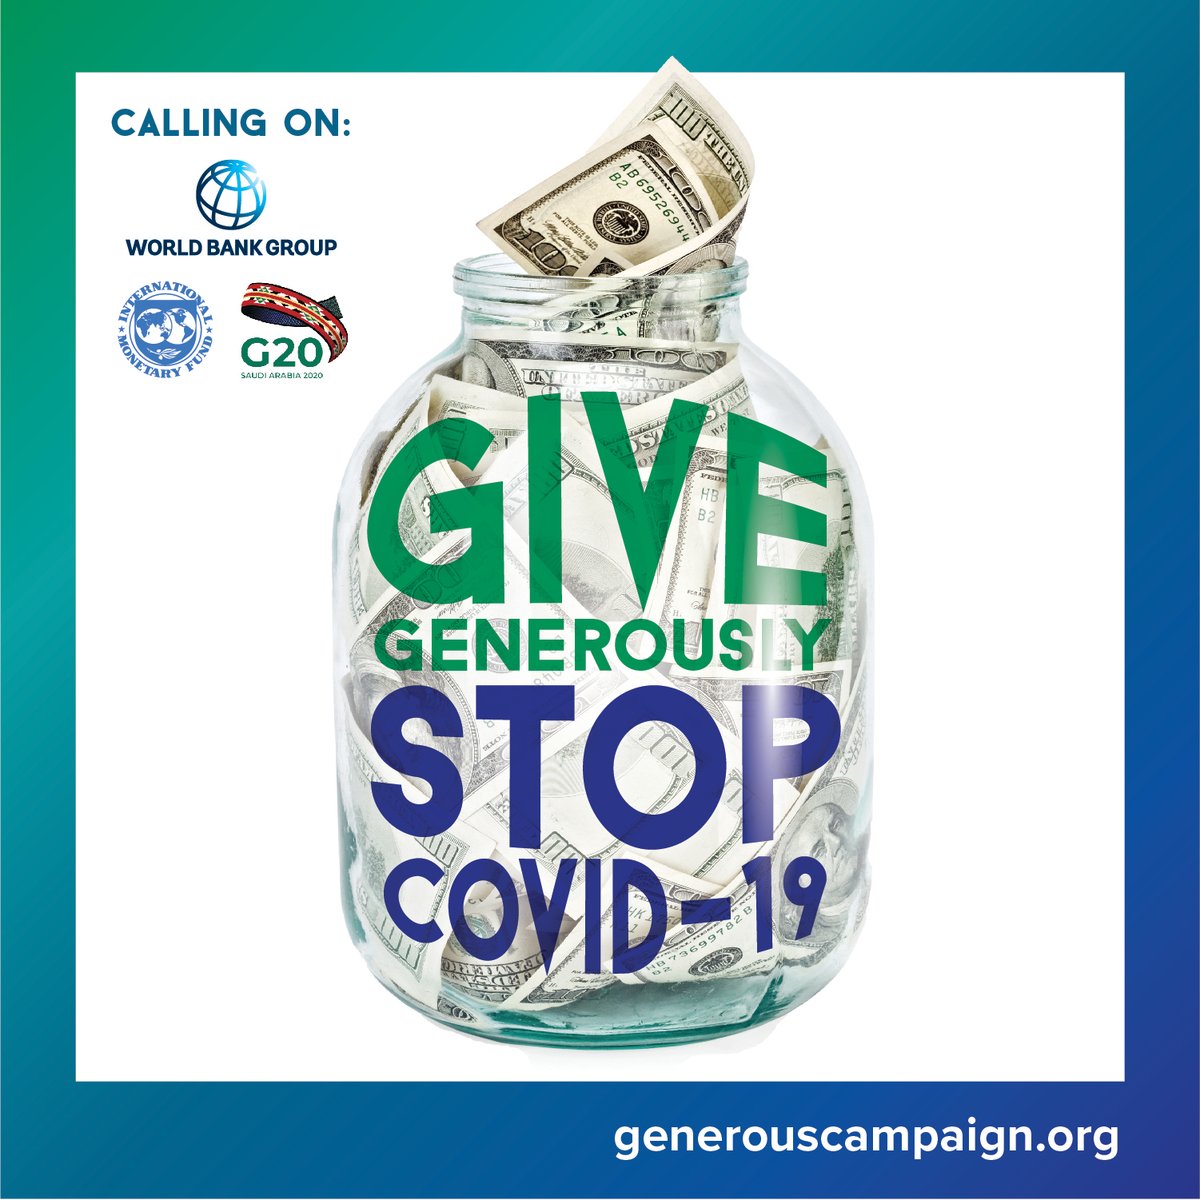 More than ever, it’s up to all of us to work together to #EndCOVID19Now. The distinction between Low-Income, Middle-Income and High-Income countries is no longer relevant – we are all affected, and our leaders must #GiveGenerously #SaveLives. #GenerousCampaign